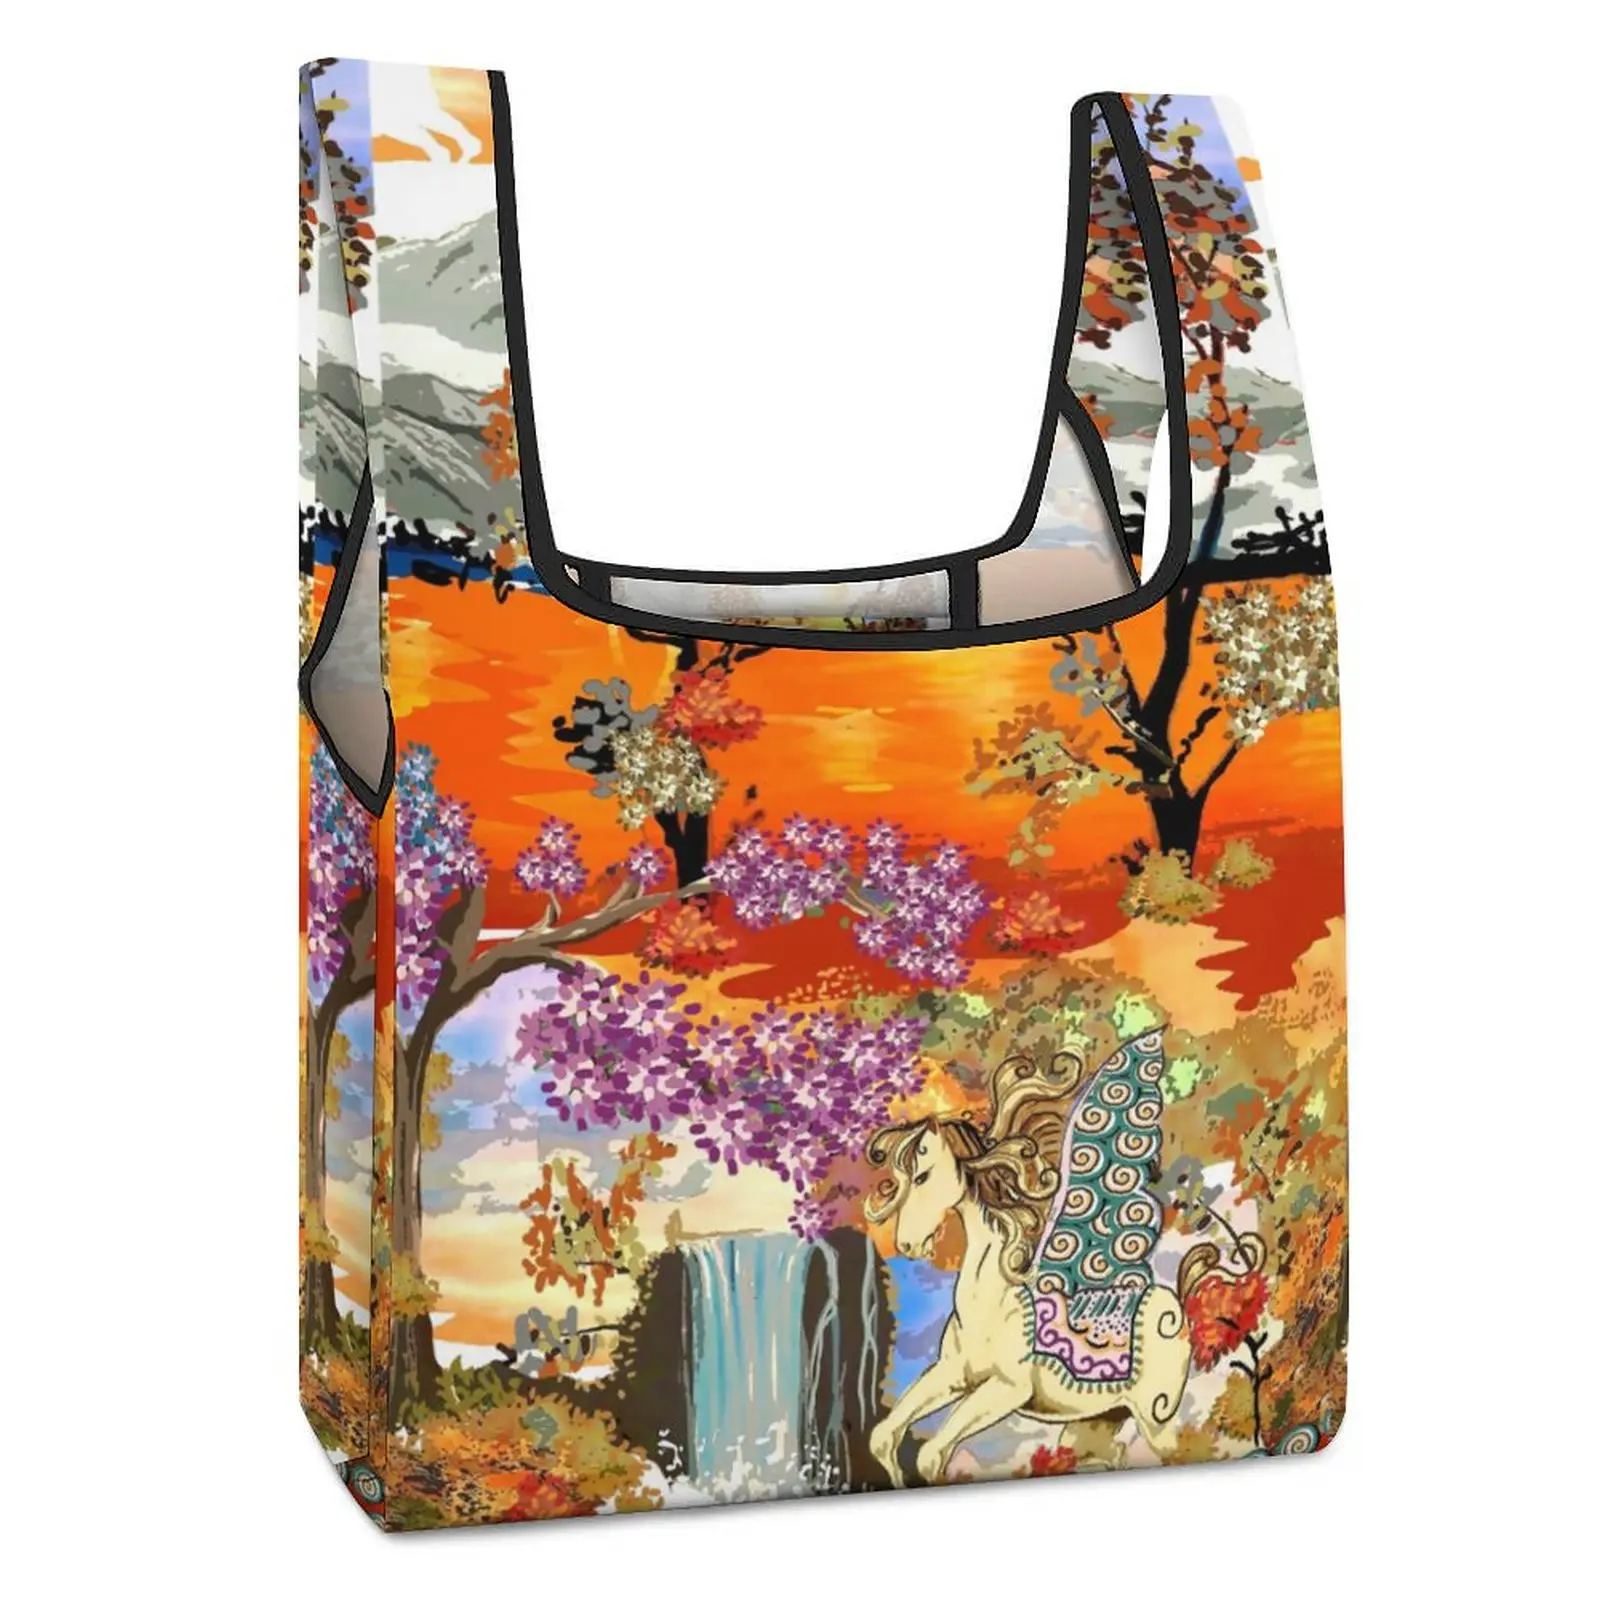 Customized Printed Collapsible Shopping Bag Double Strap Handbag Colored Printing Tote Casual Woman Grocery Bag Custom Pattern 10pairs high quality bag side clip metal buckles screw handbag strap handles connector hooks bag hanger clasp diy leather craft